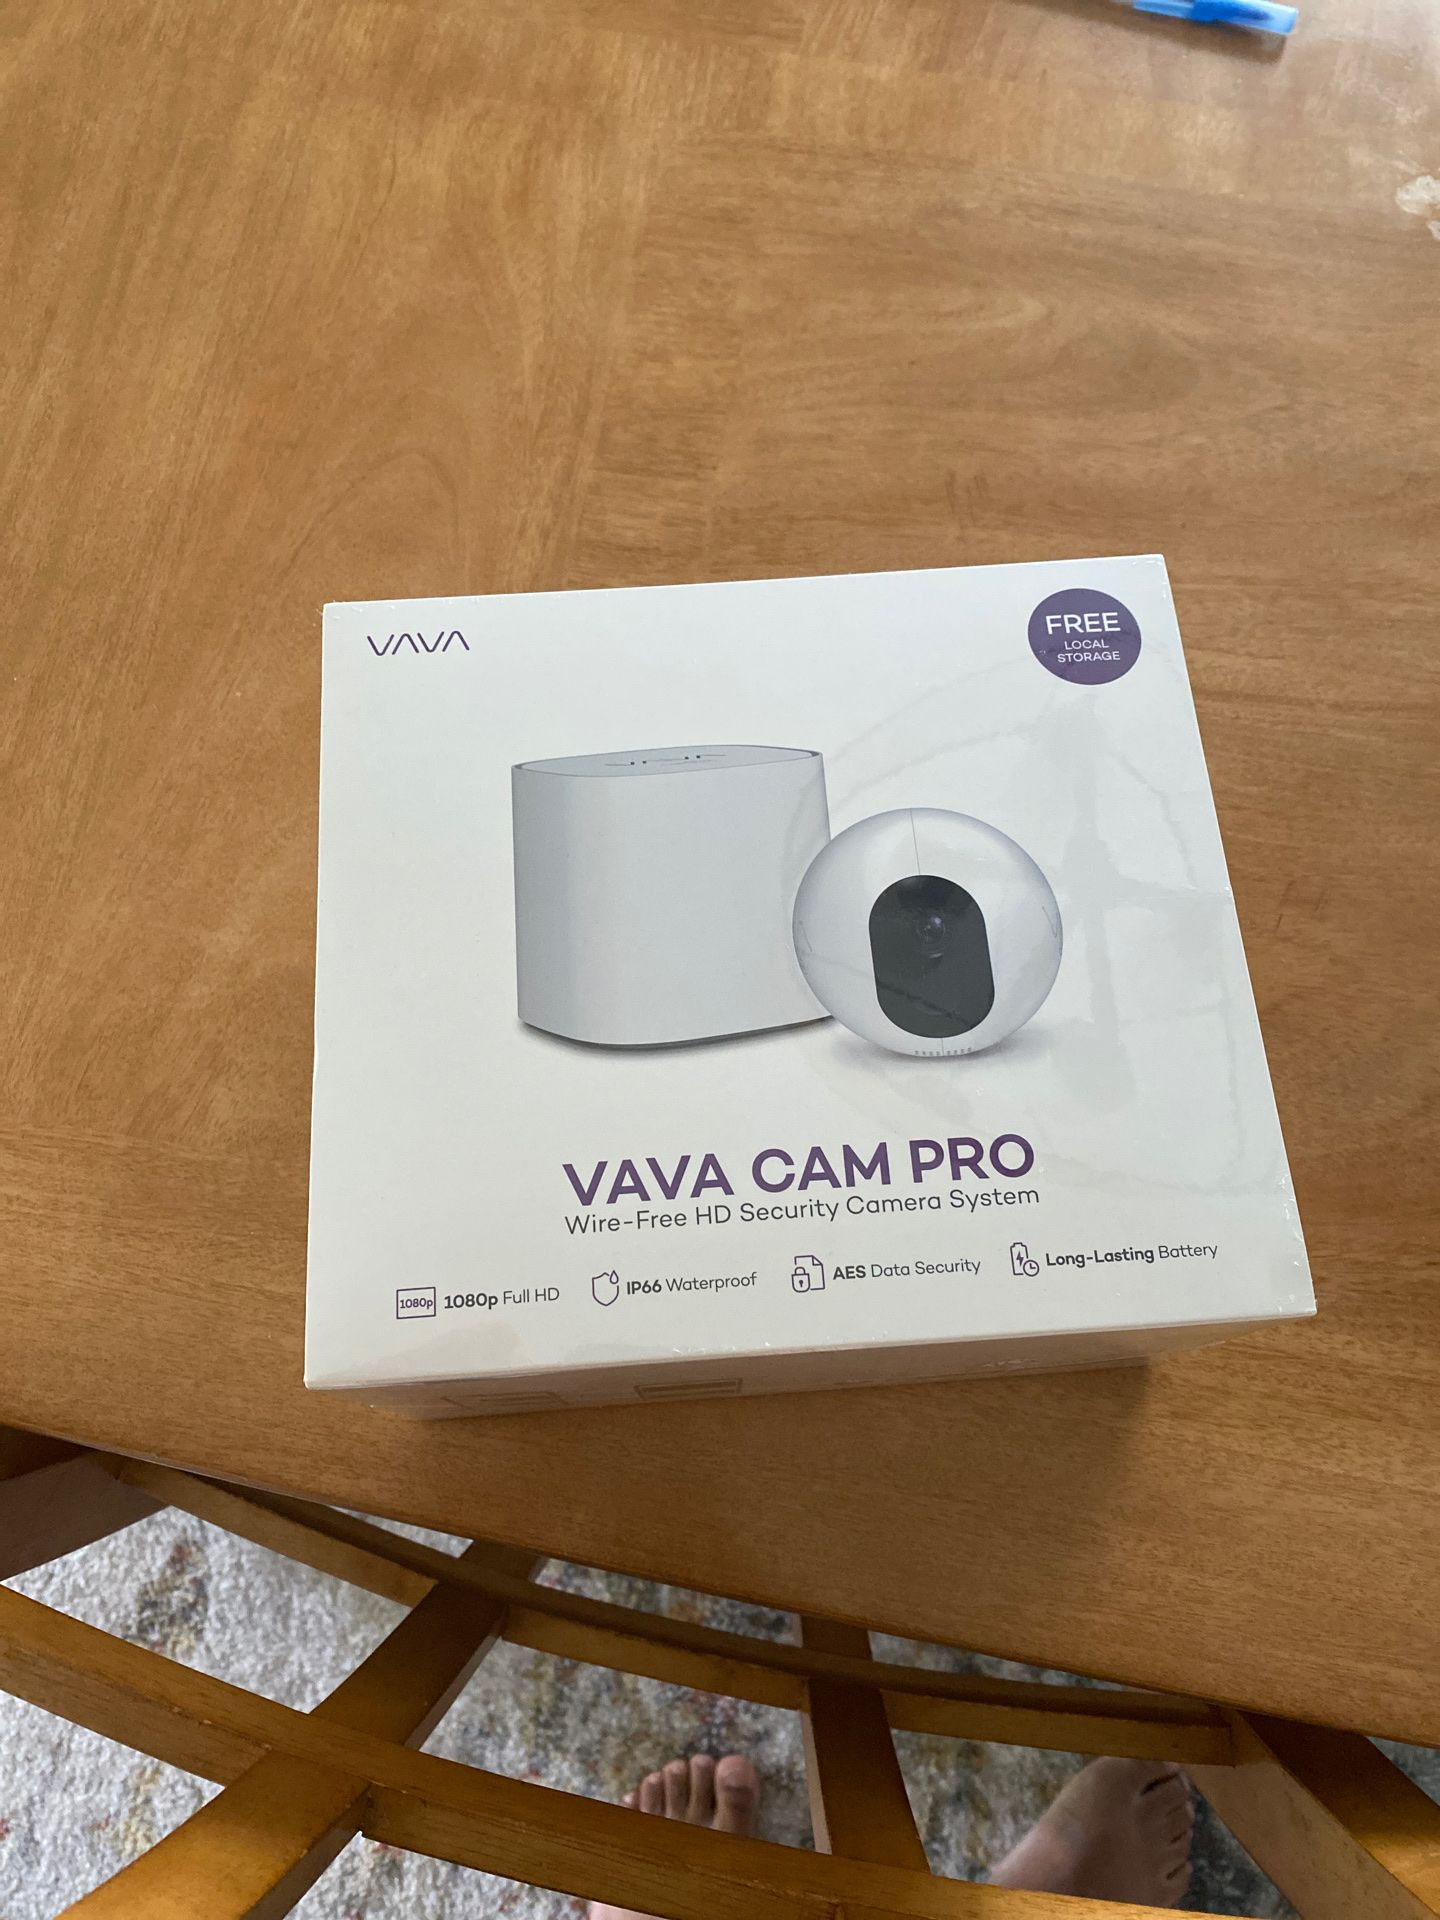 Completely unopened security camera system, retails for $170+